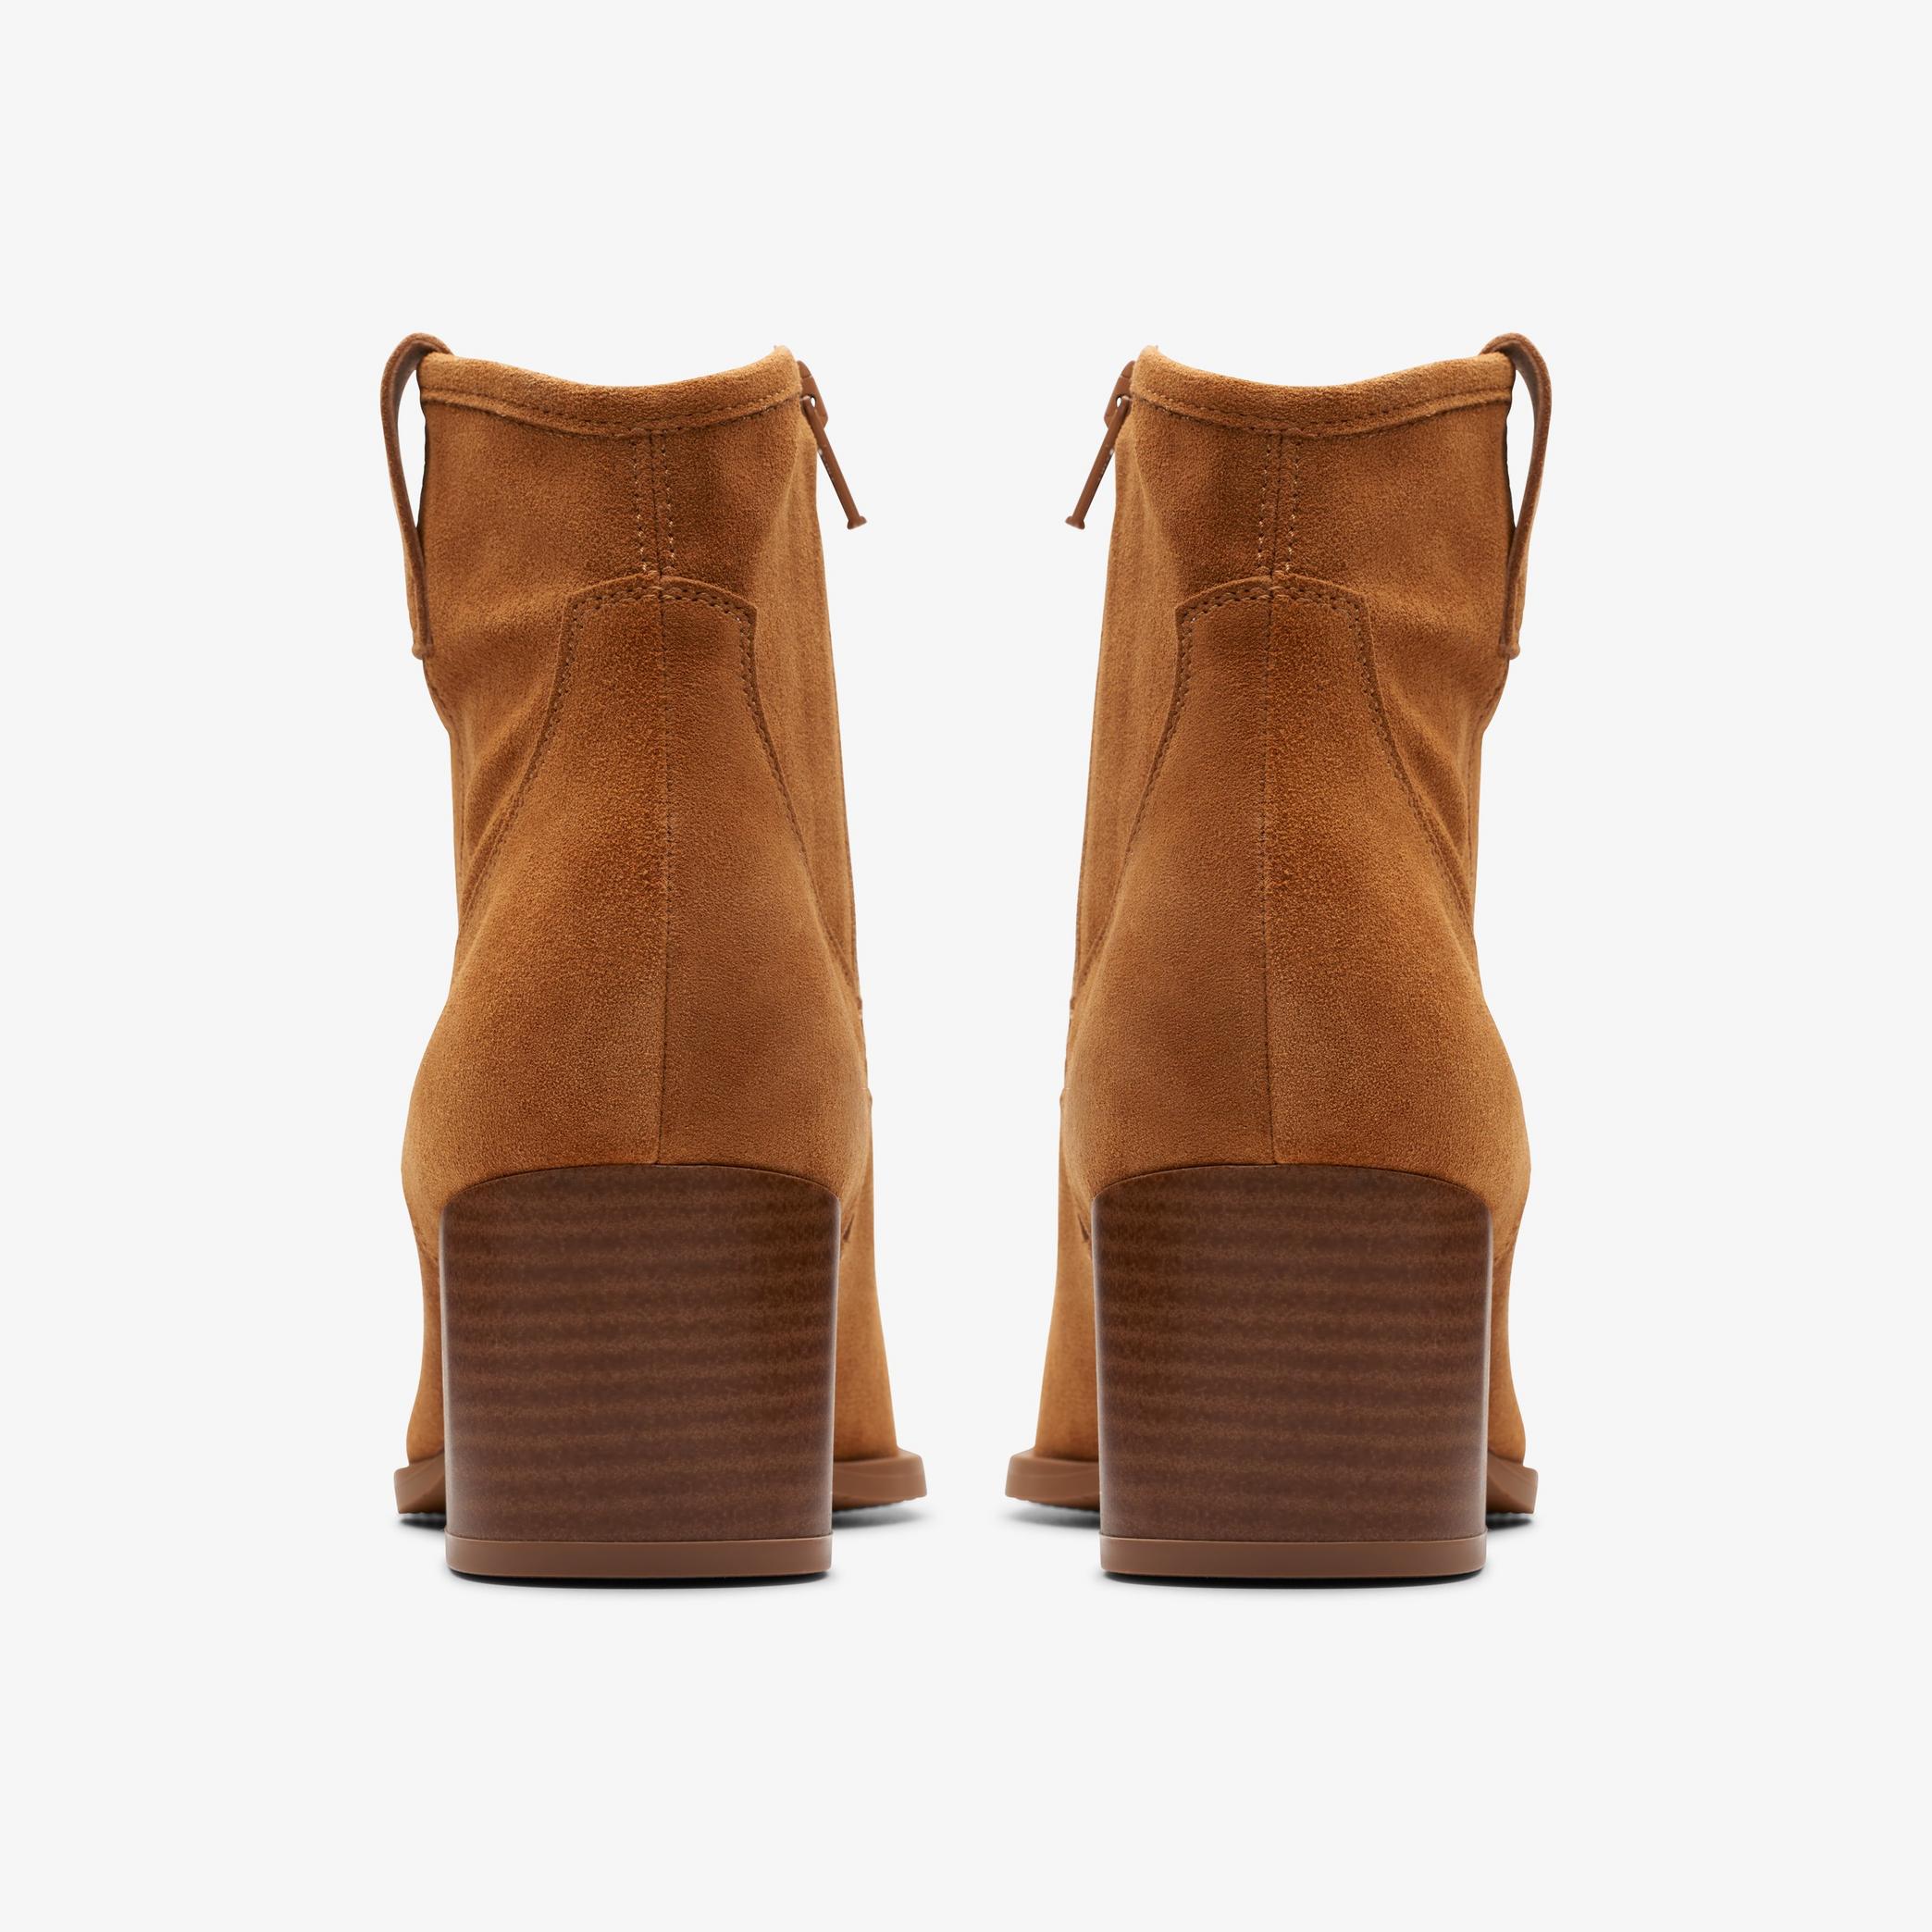 Elder Rae Tan Suede Ankle Boots, view 6 of 7